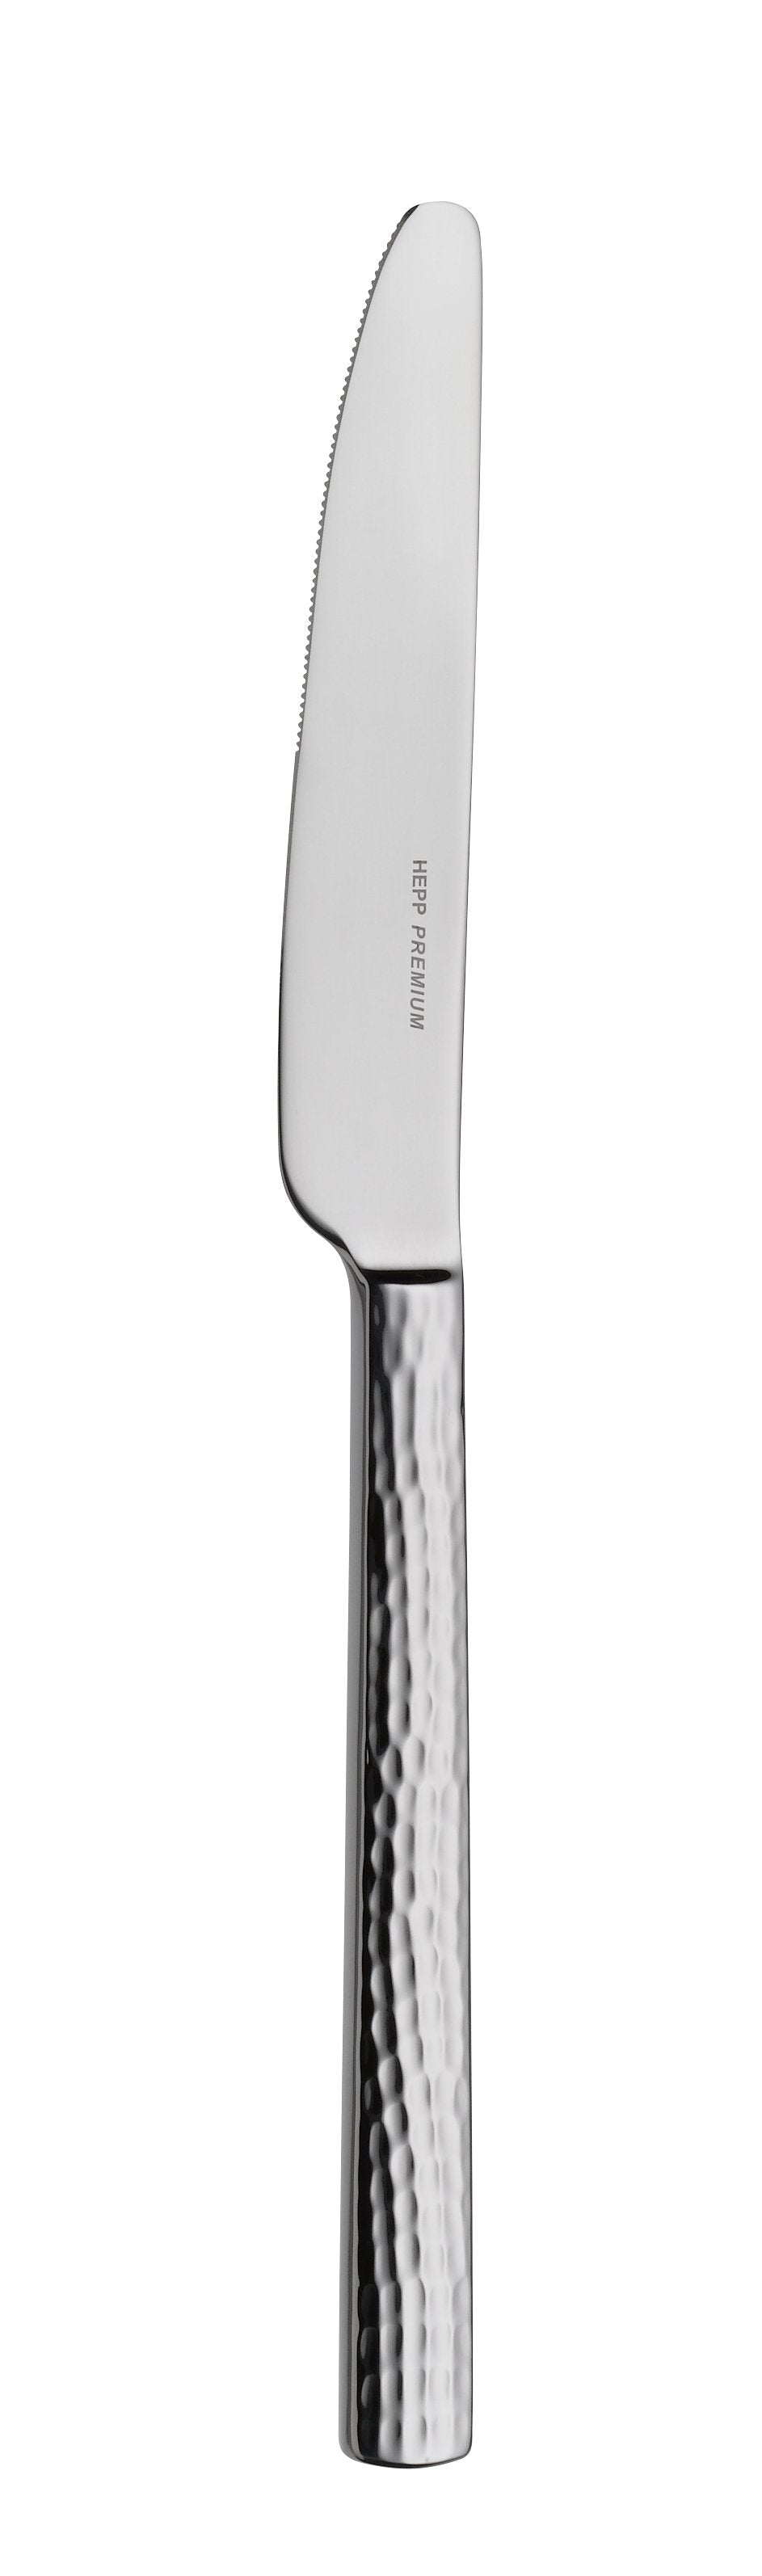 Table knife MB LENISTA silver plated 236mm